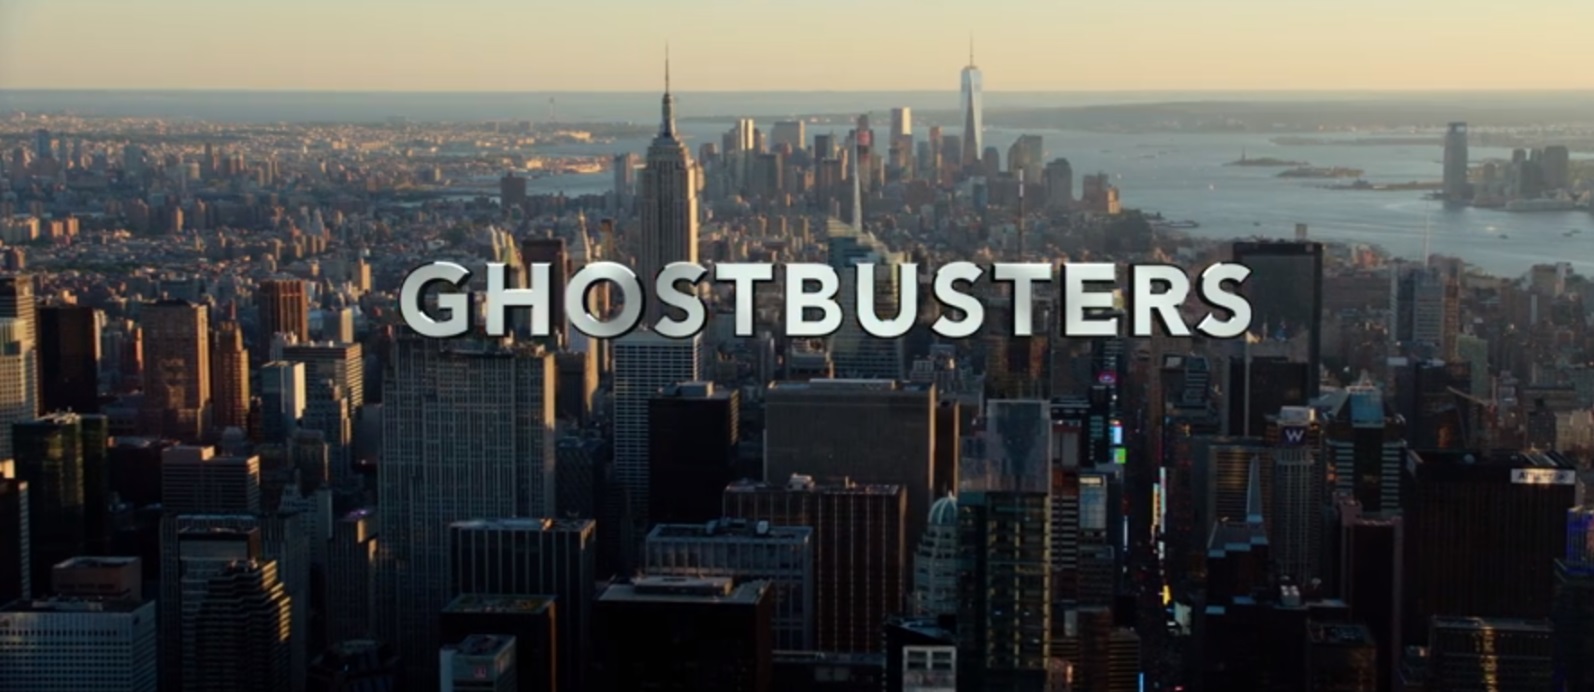 Ghostbusters (2016) Film Locations